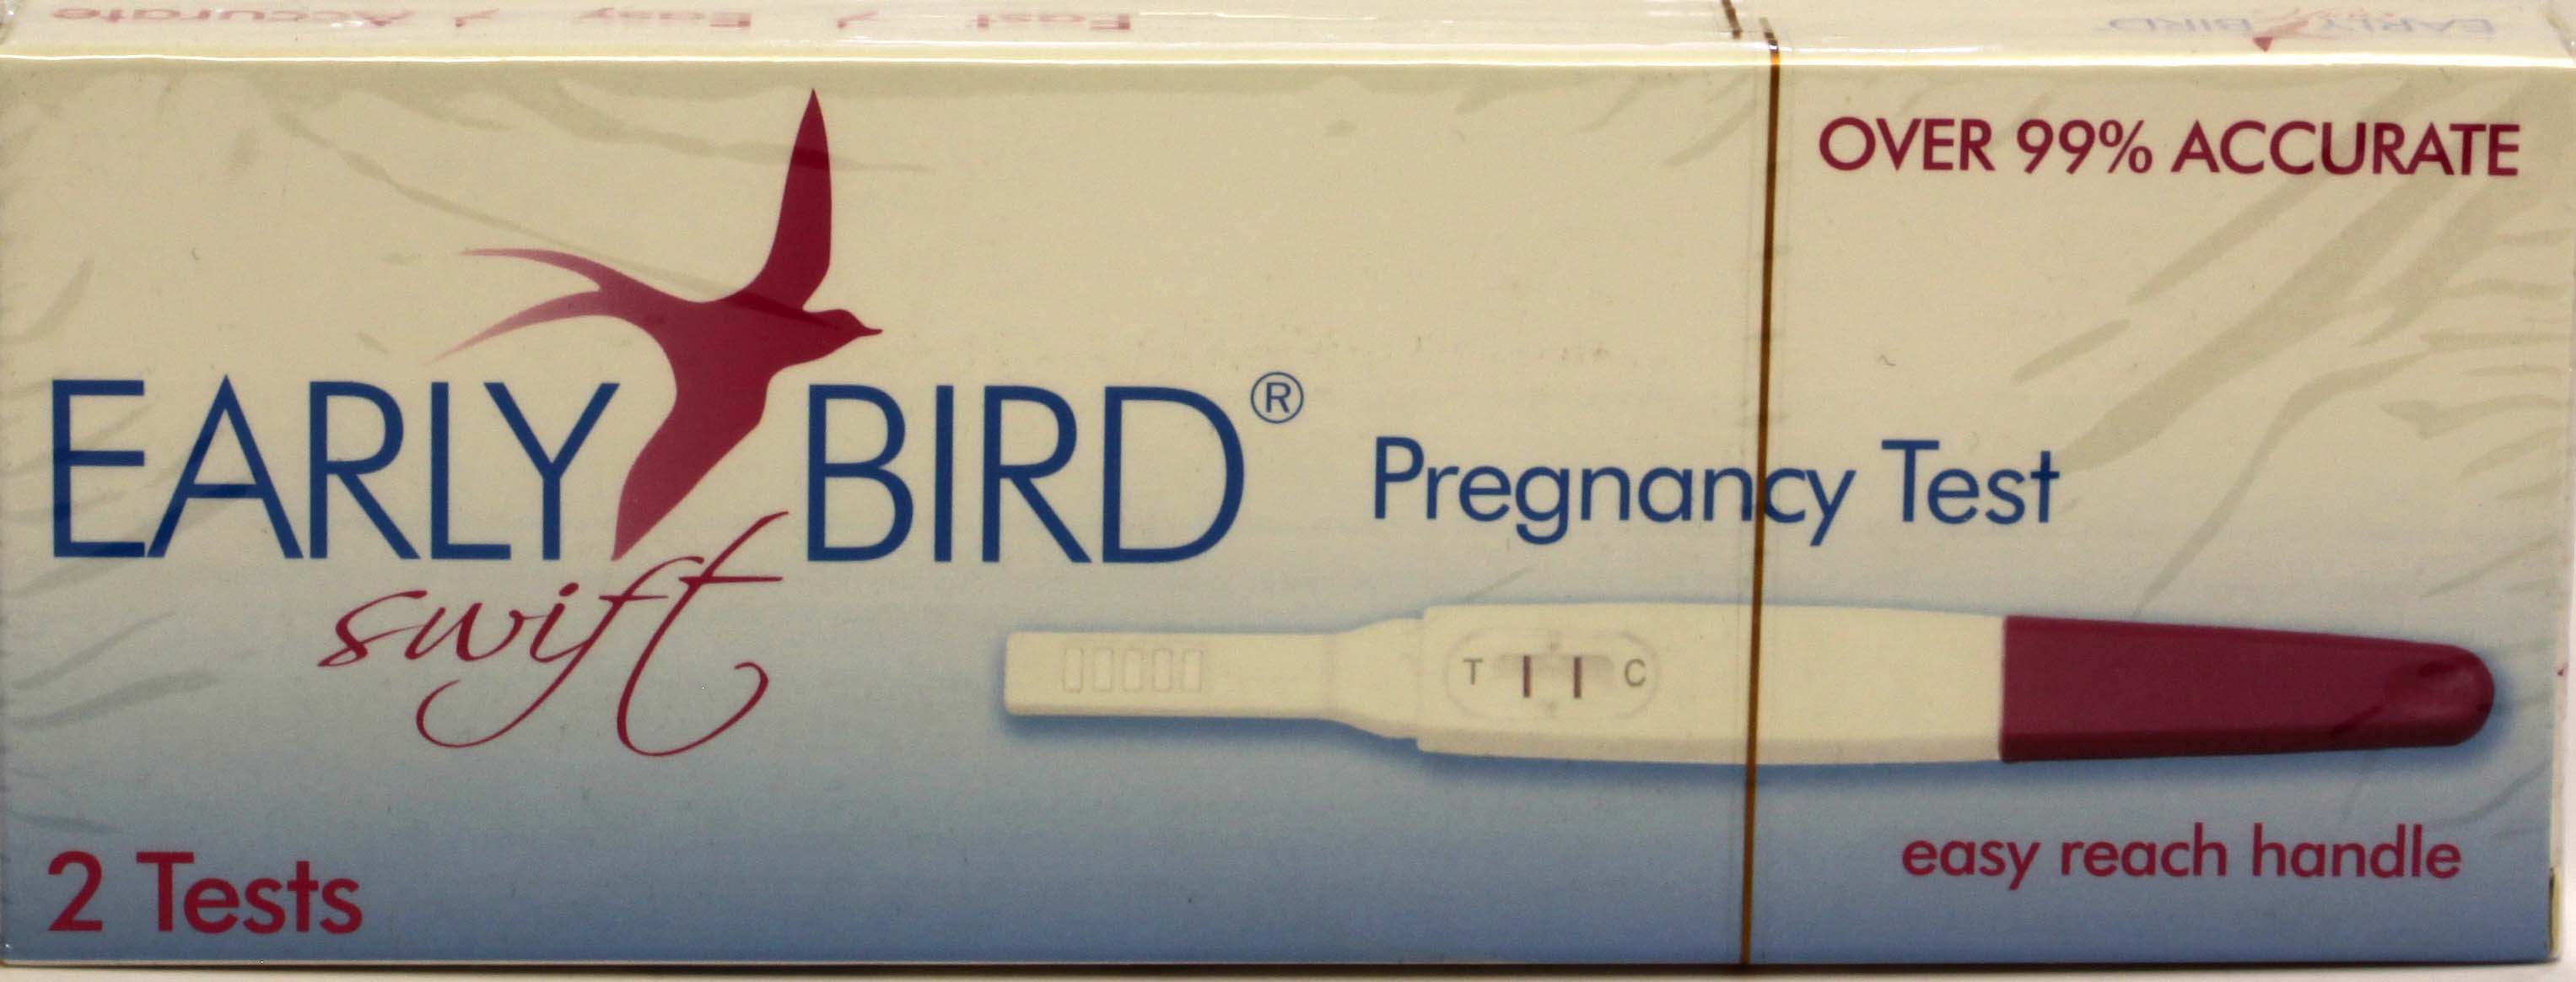 Early Bird Pregnancy Test - 2 Tests